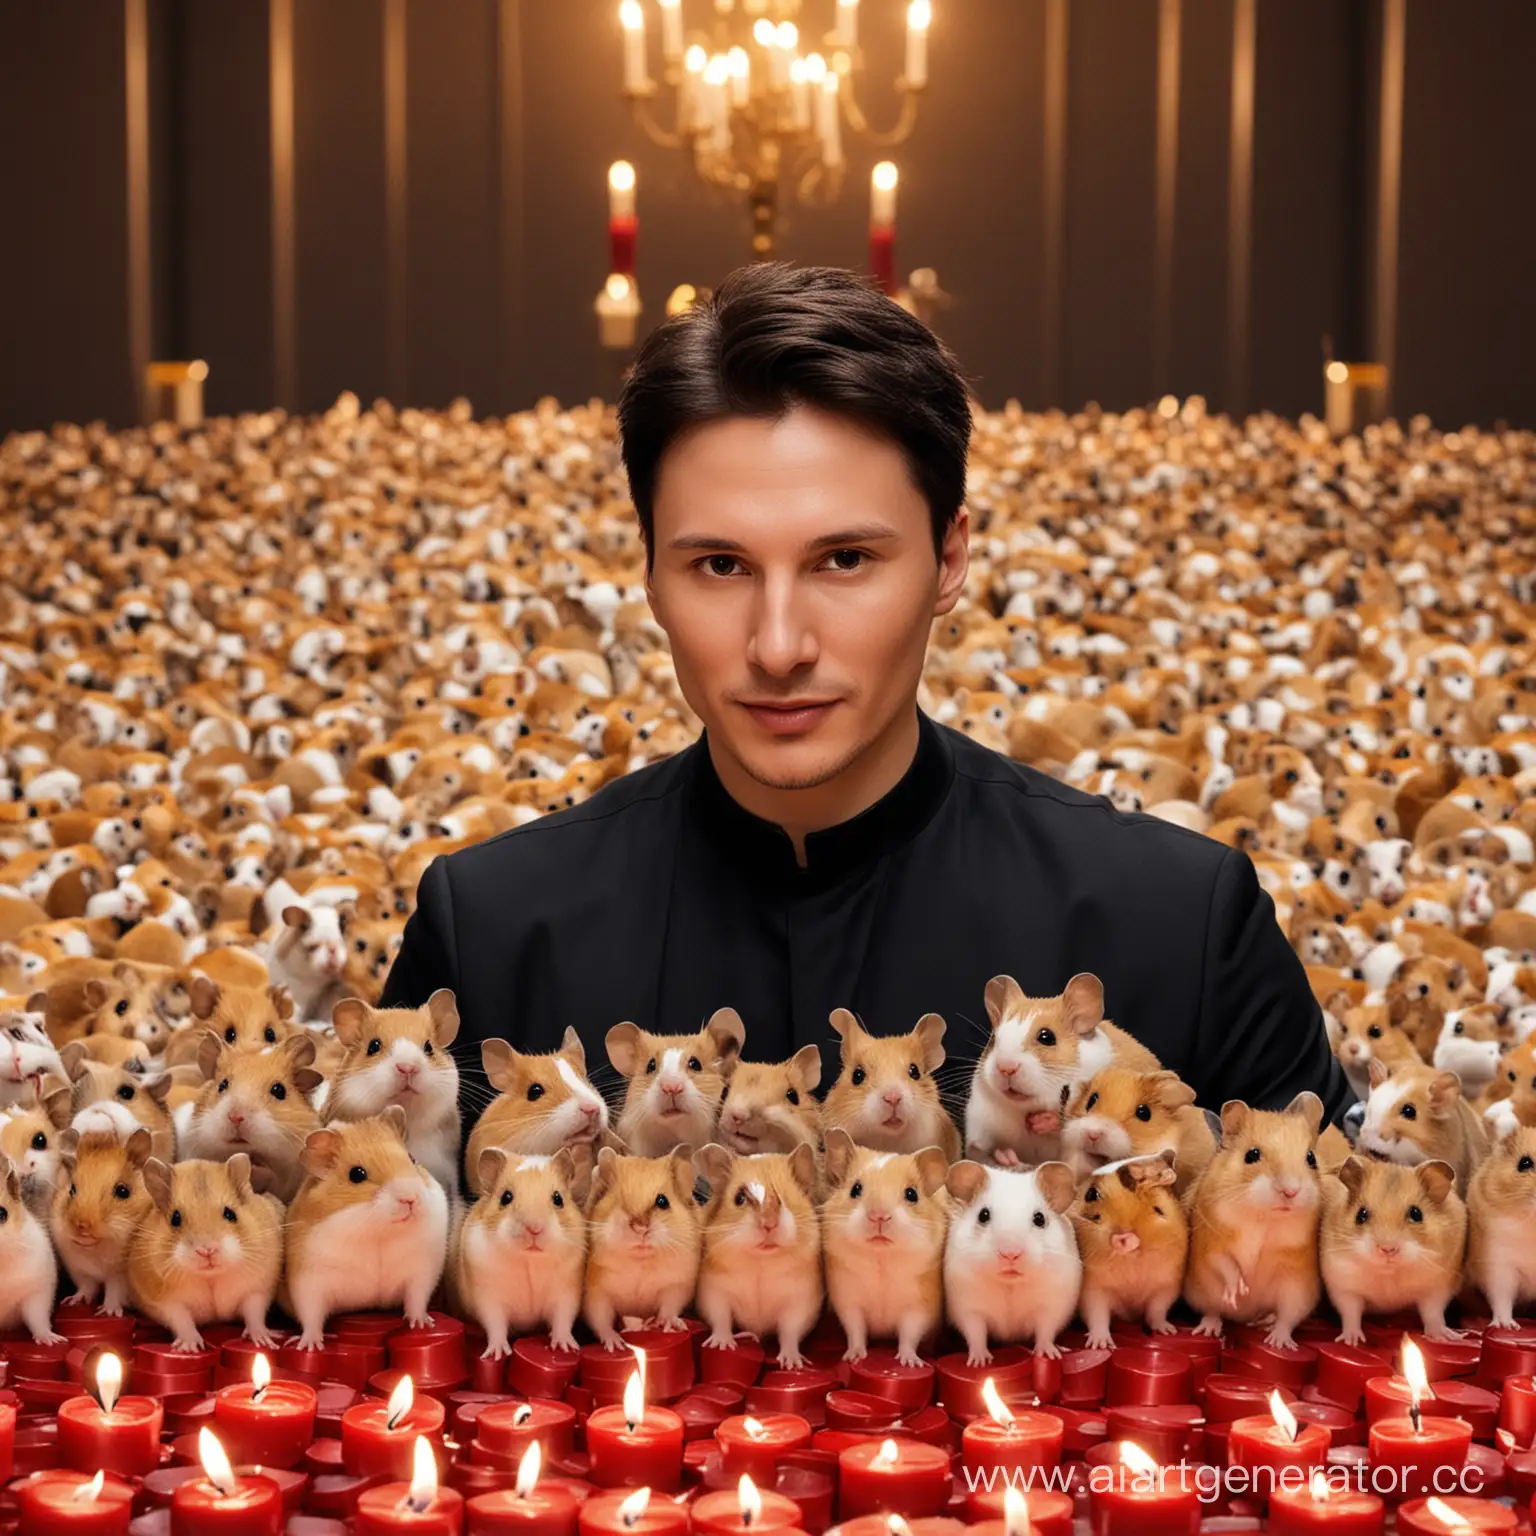 Pavel-Durov-passionately-explains-something-to-thousands-of-hamsters-with-a-cryptocurrency-candle